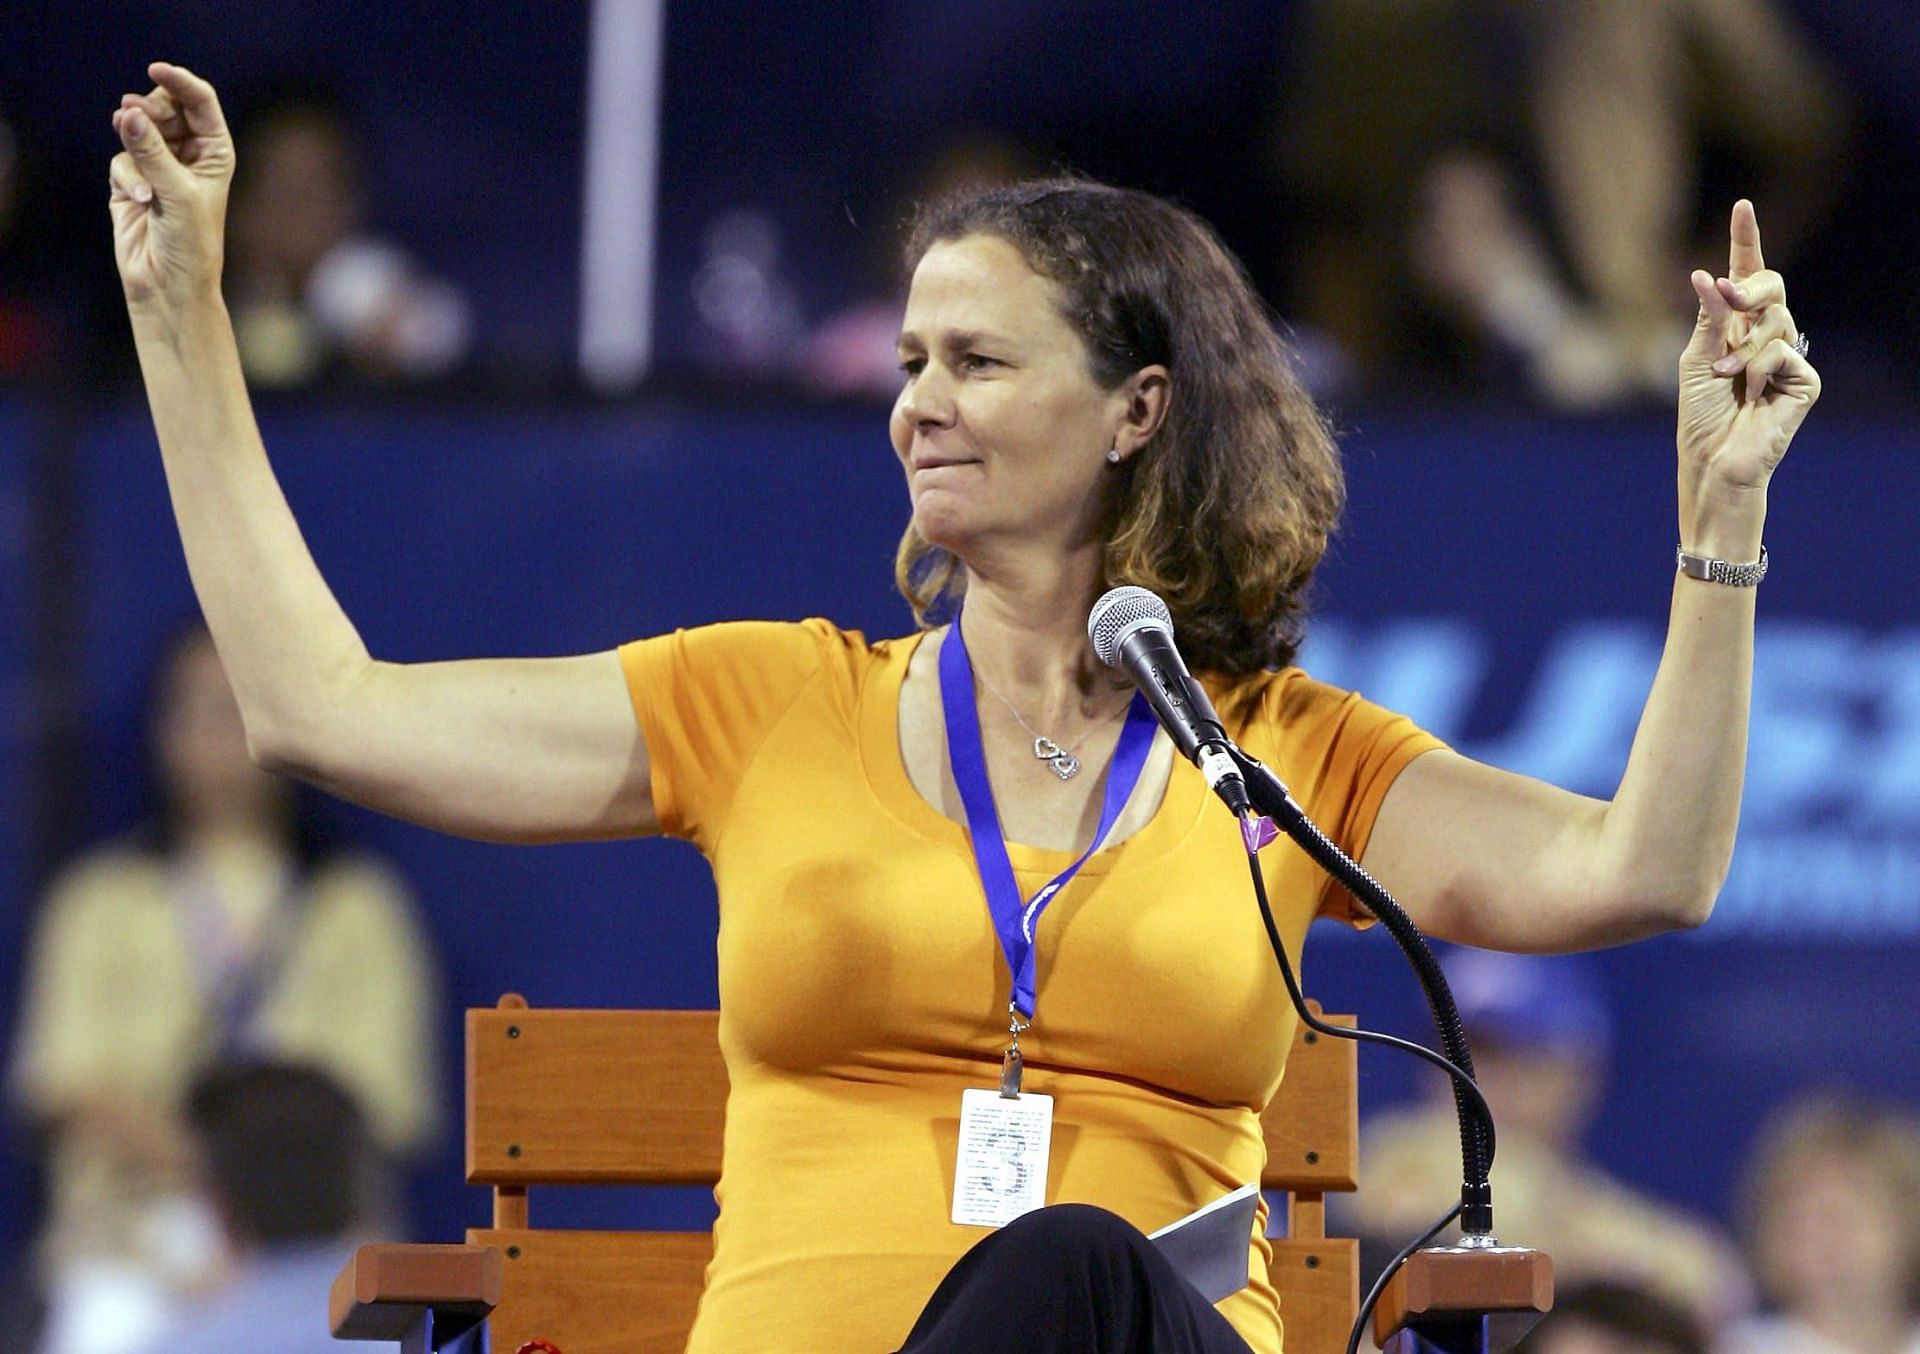 Pam Shriver wants there to be strict consequences for coaches who do not stick to the rules